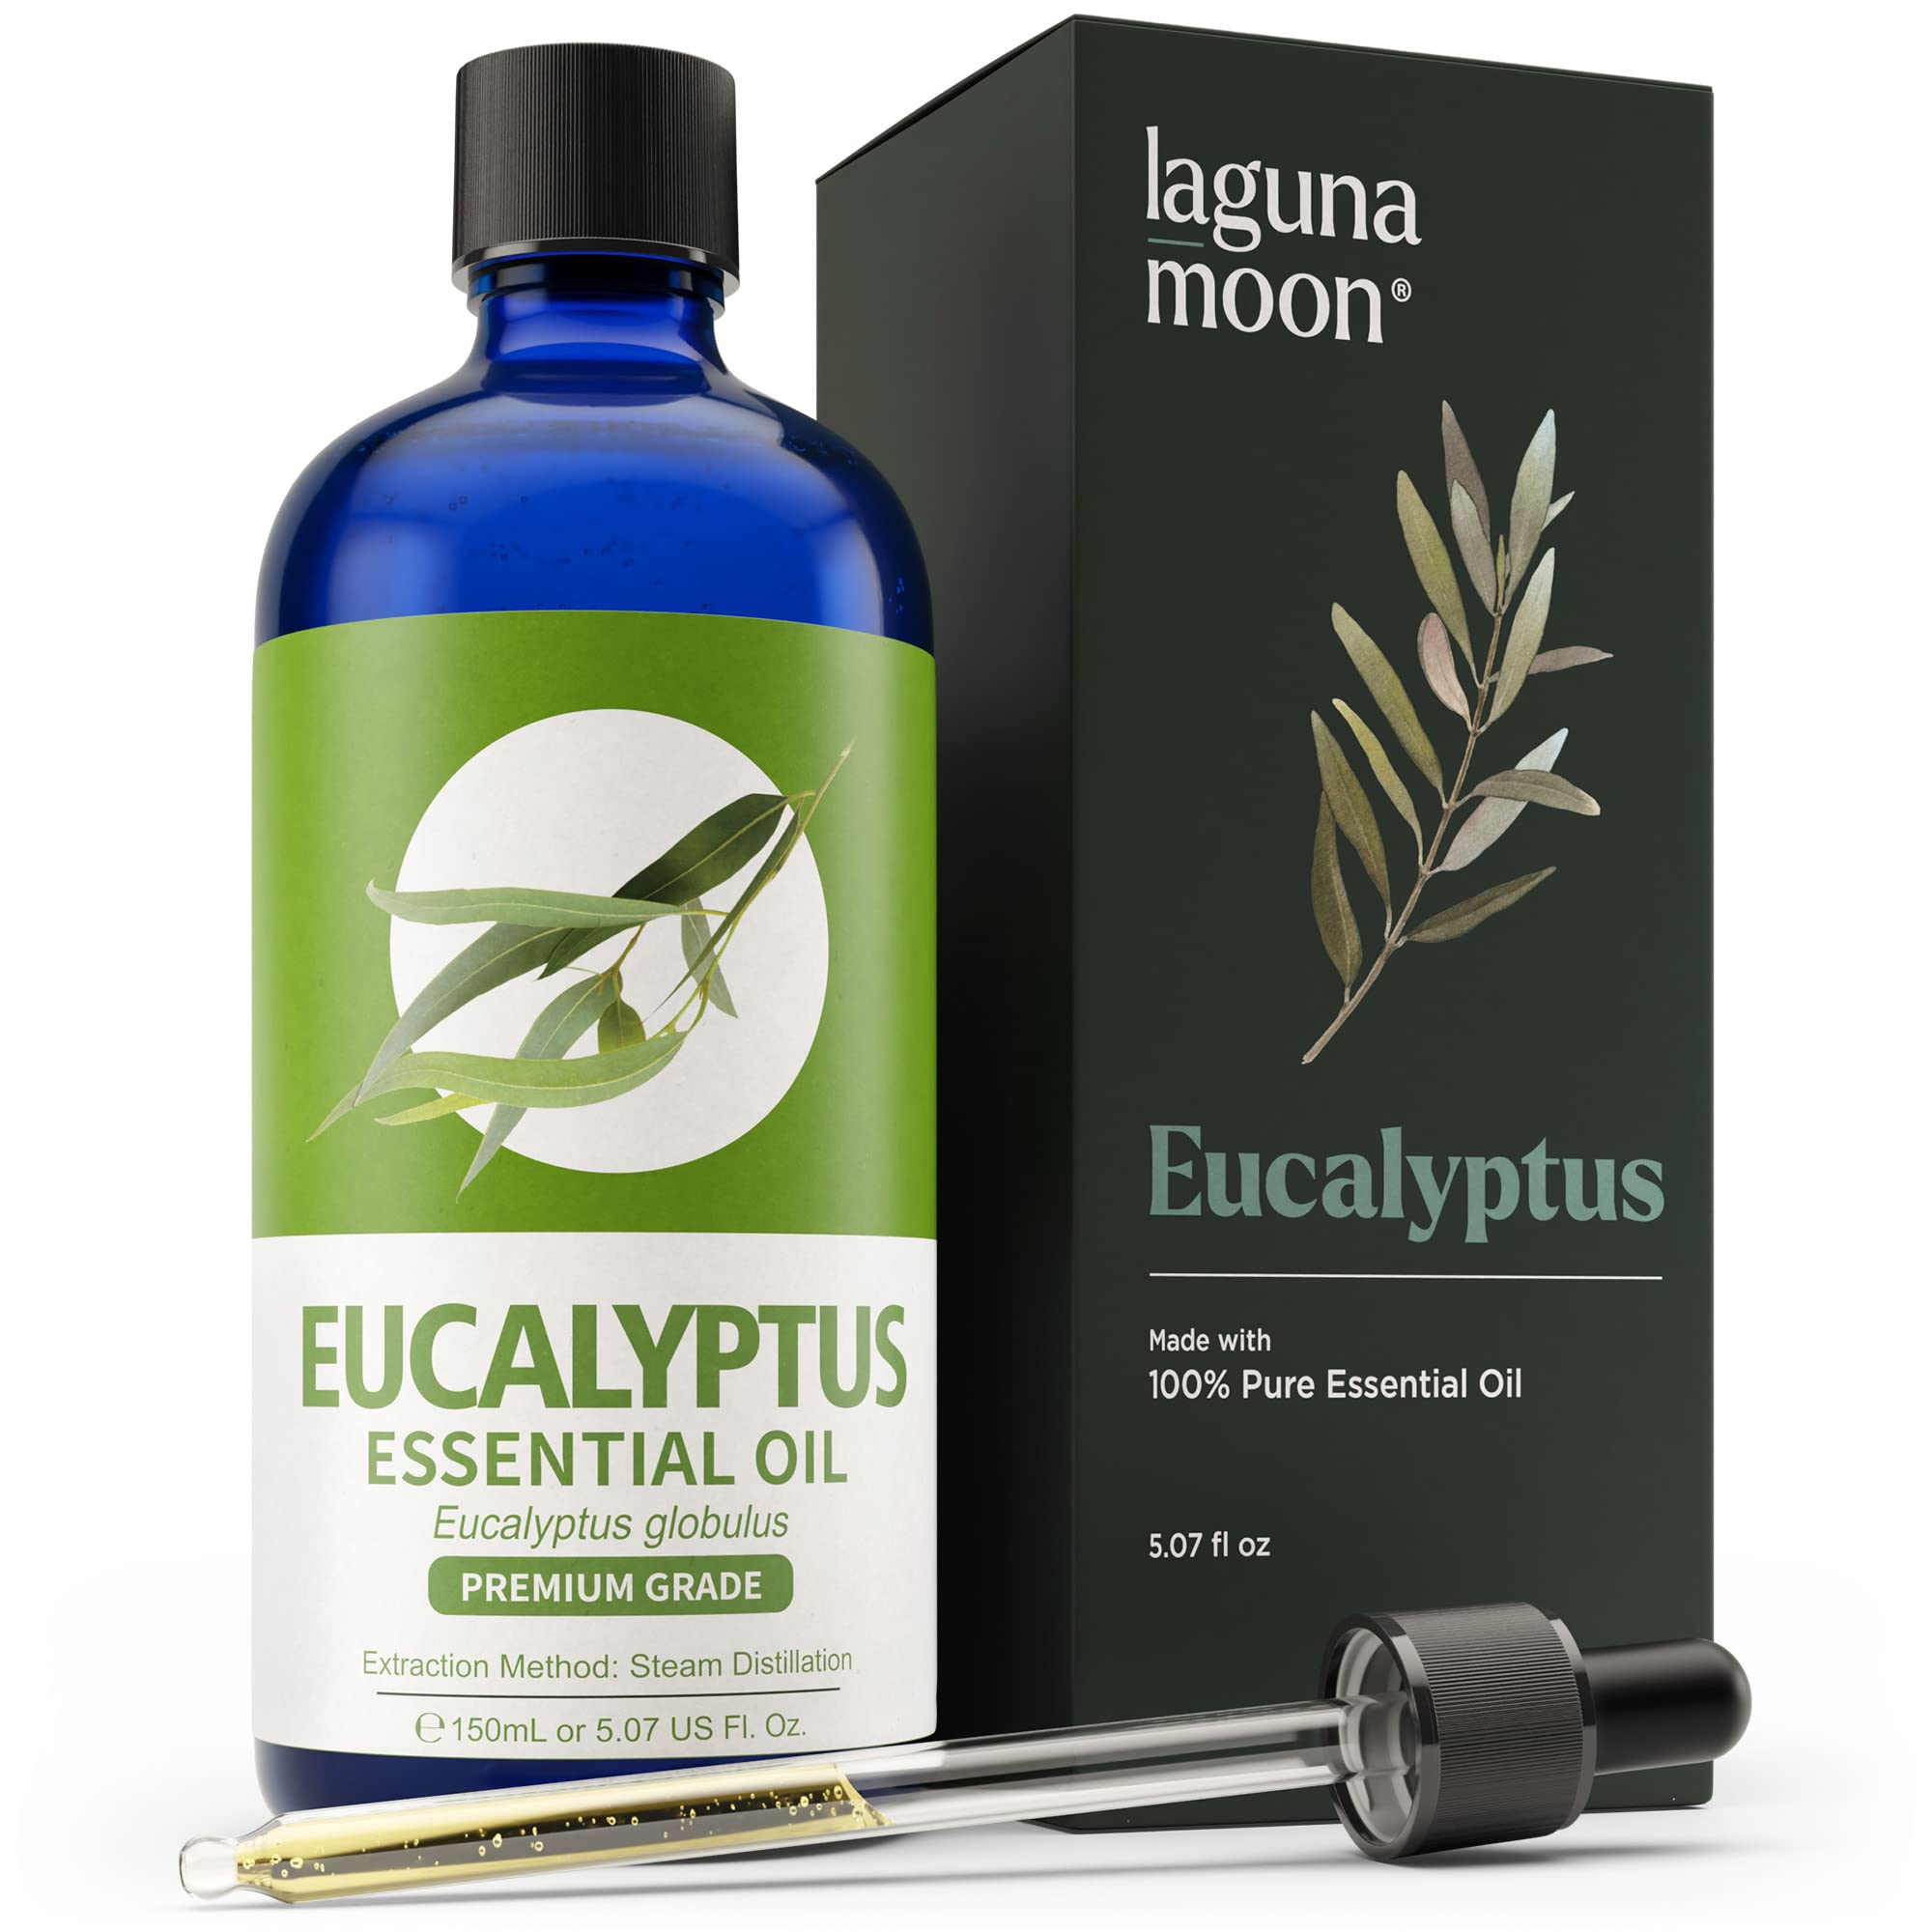 Eucalyptus Essential Oil - XXL Size Bottle w/Organic Therapeutic Grade Oils for Diffusers, Humidifiers, Massages, Yoga, Home, Skin Care, Office - Aromatherapy for Soap Scents & Candle Making (150mL)